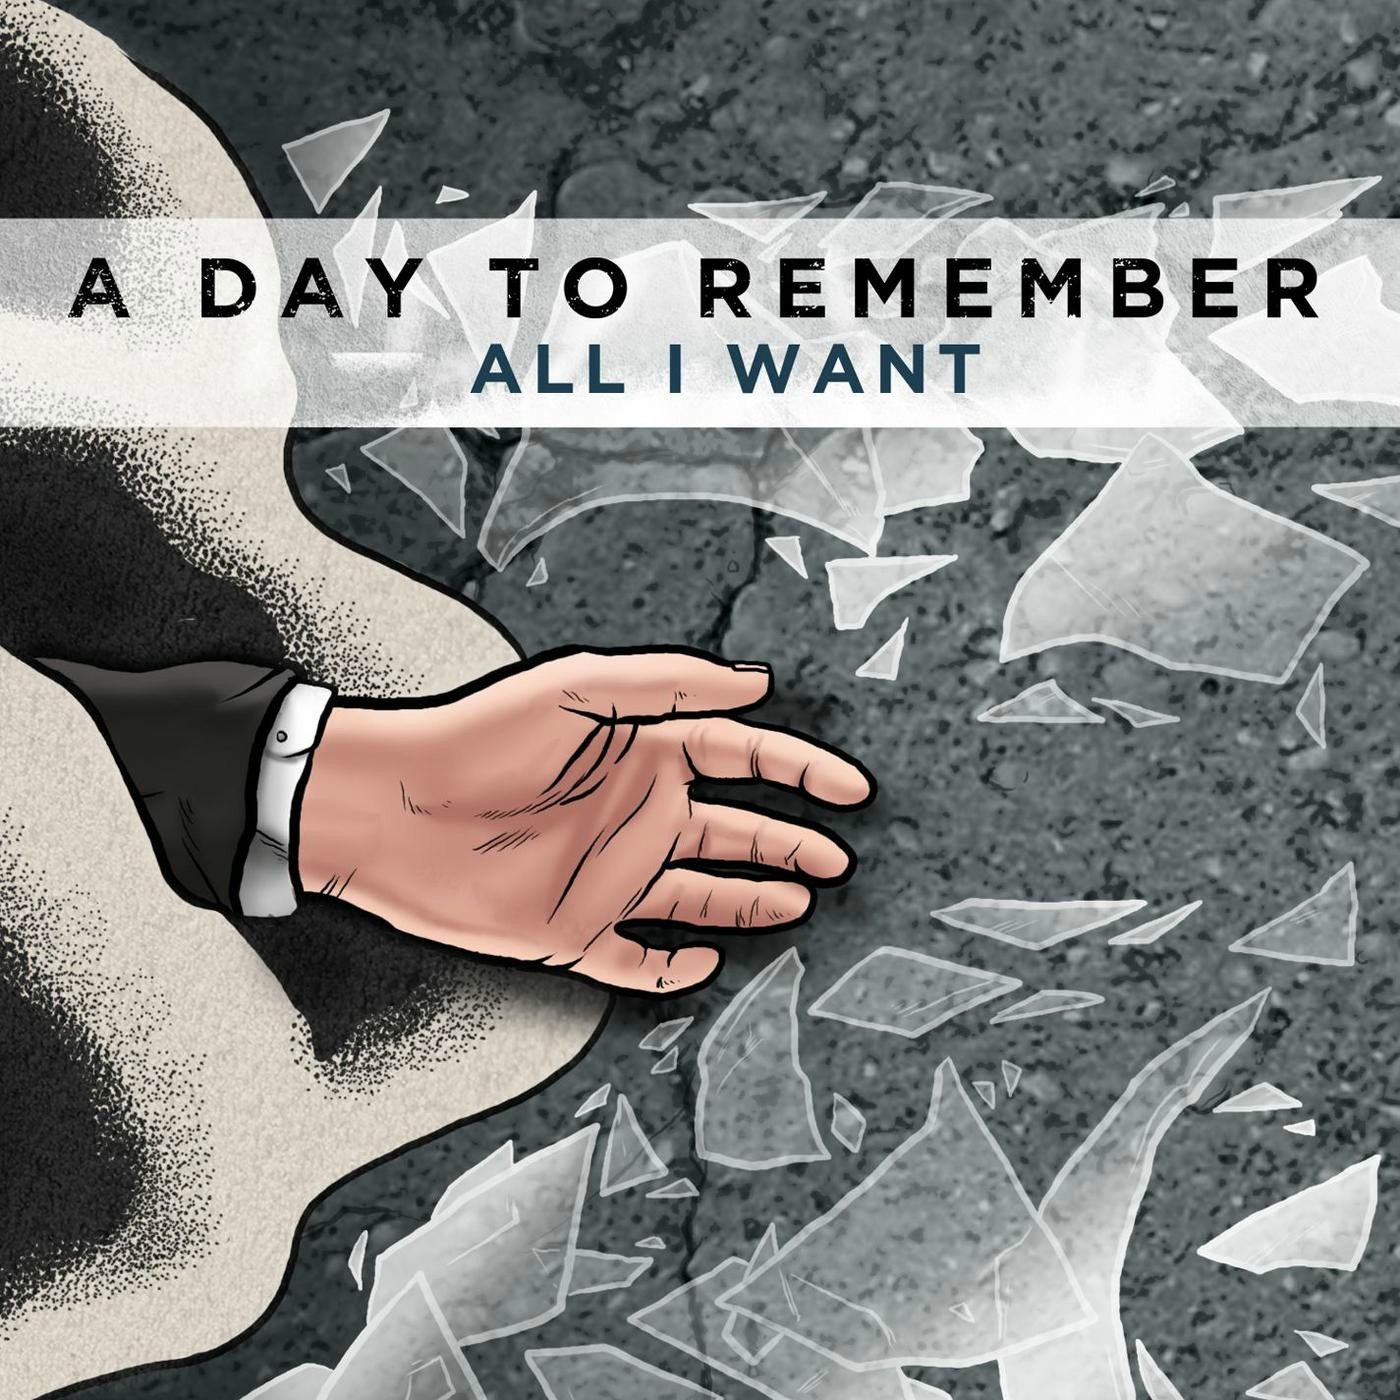 All I Want(A Day to Remember演唱歌曲)